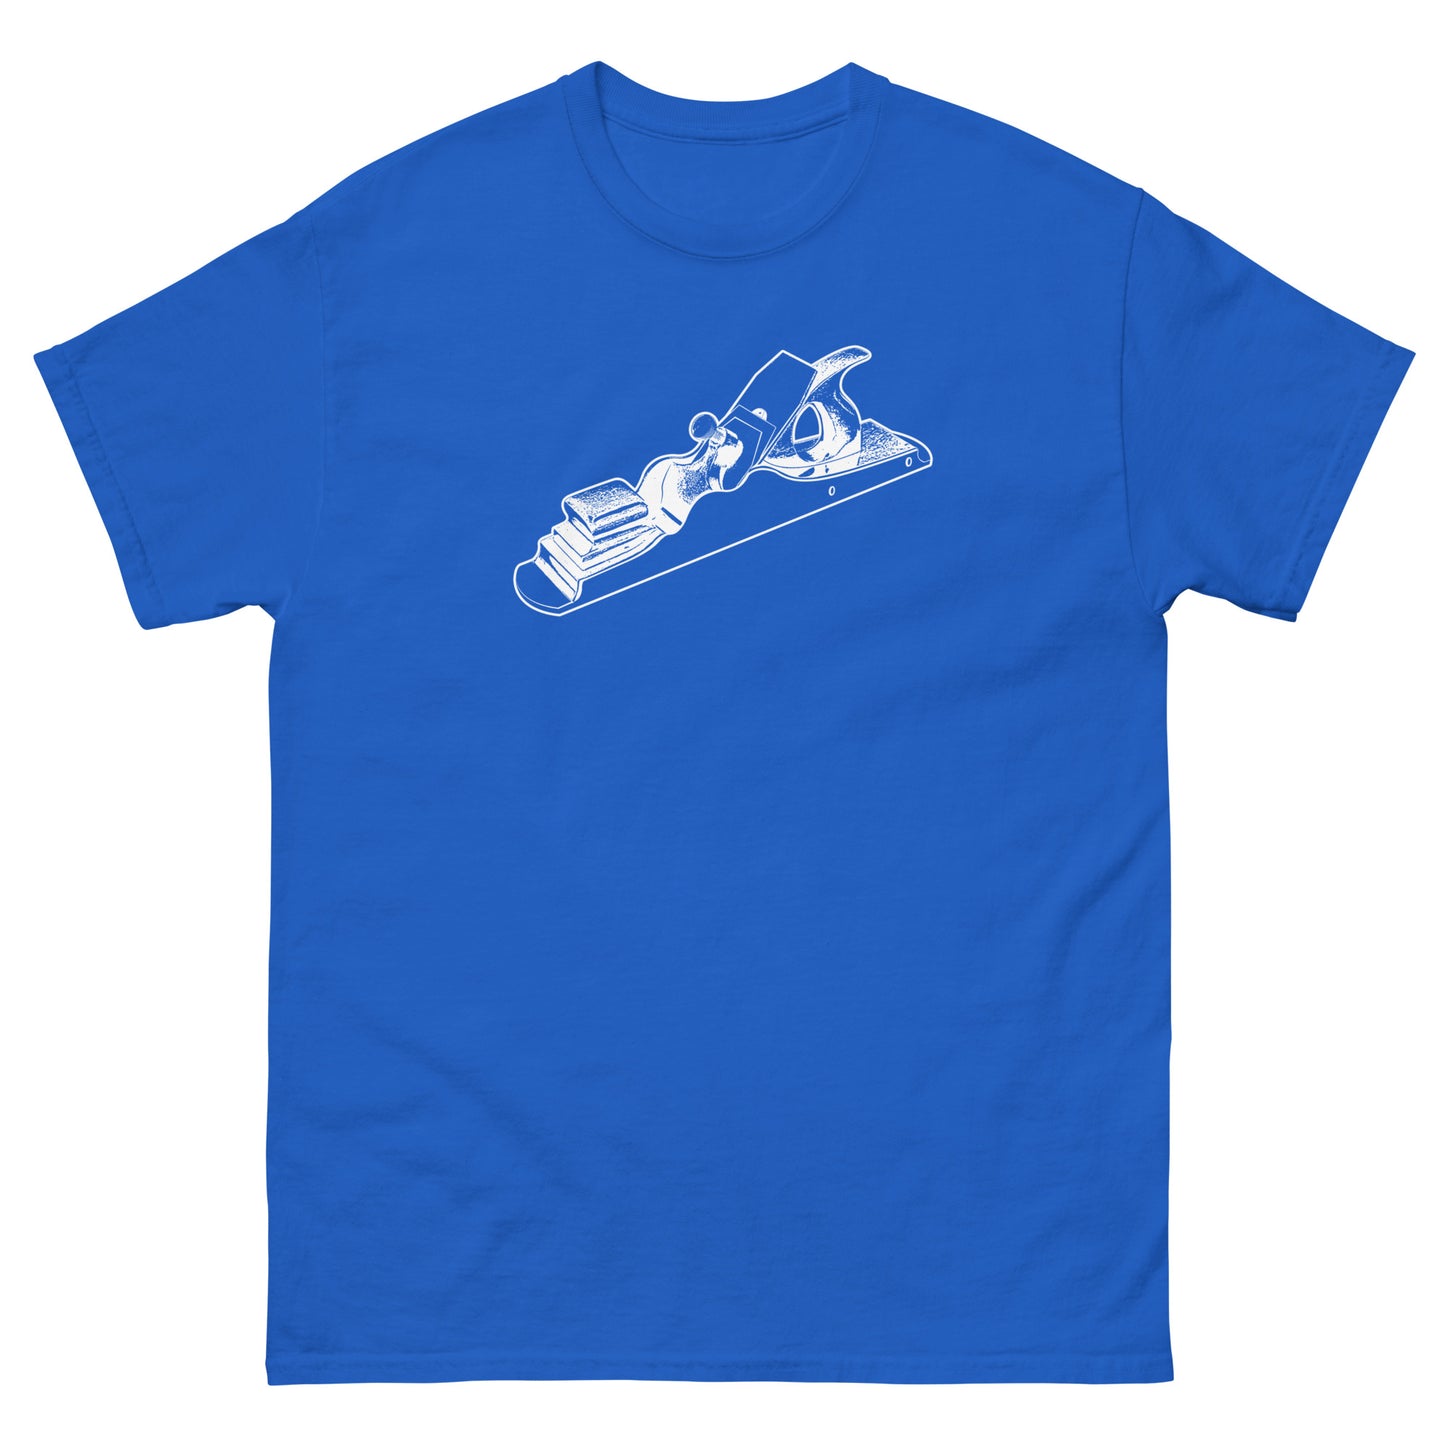 Scottish Infill Hand Plane Woodworking T-Shirt (Multiple Colors)